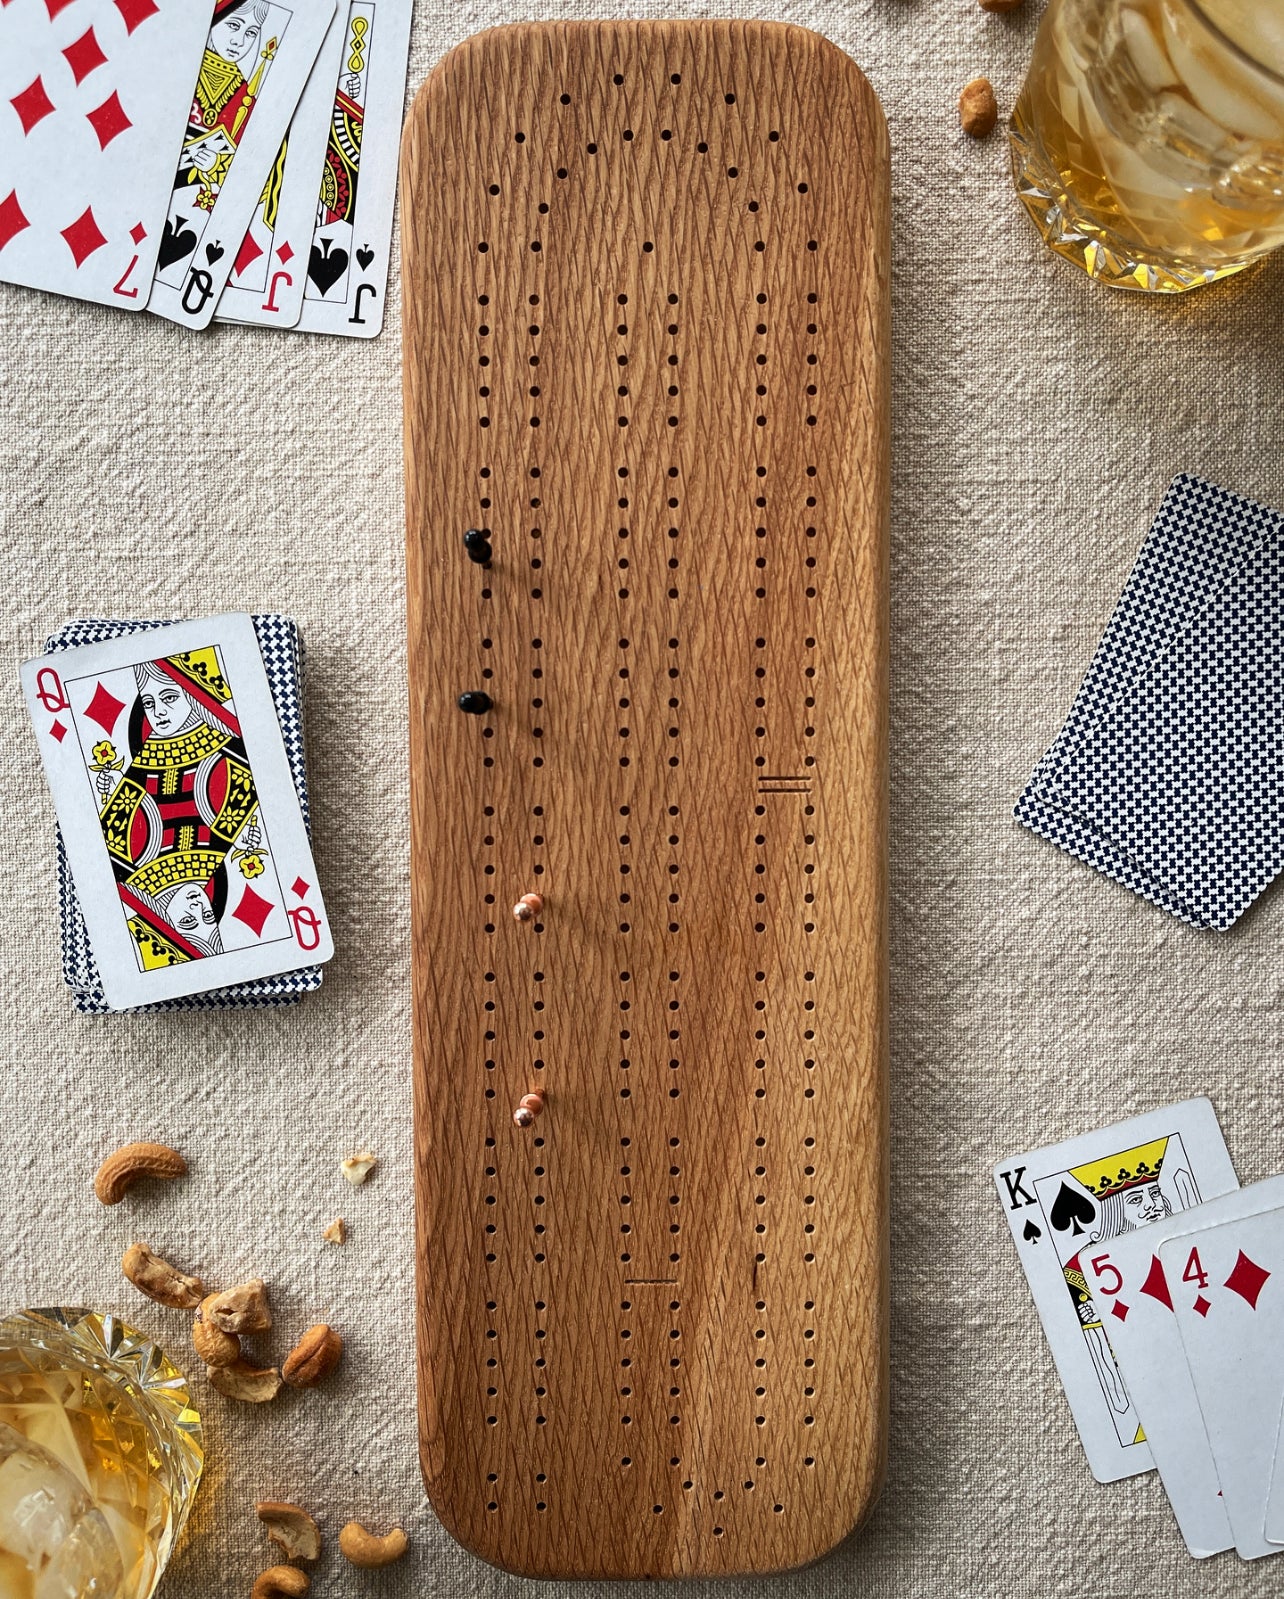 Solid wood cribbage board made from white oak.